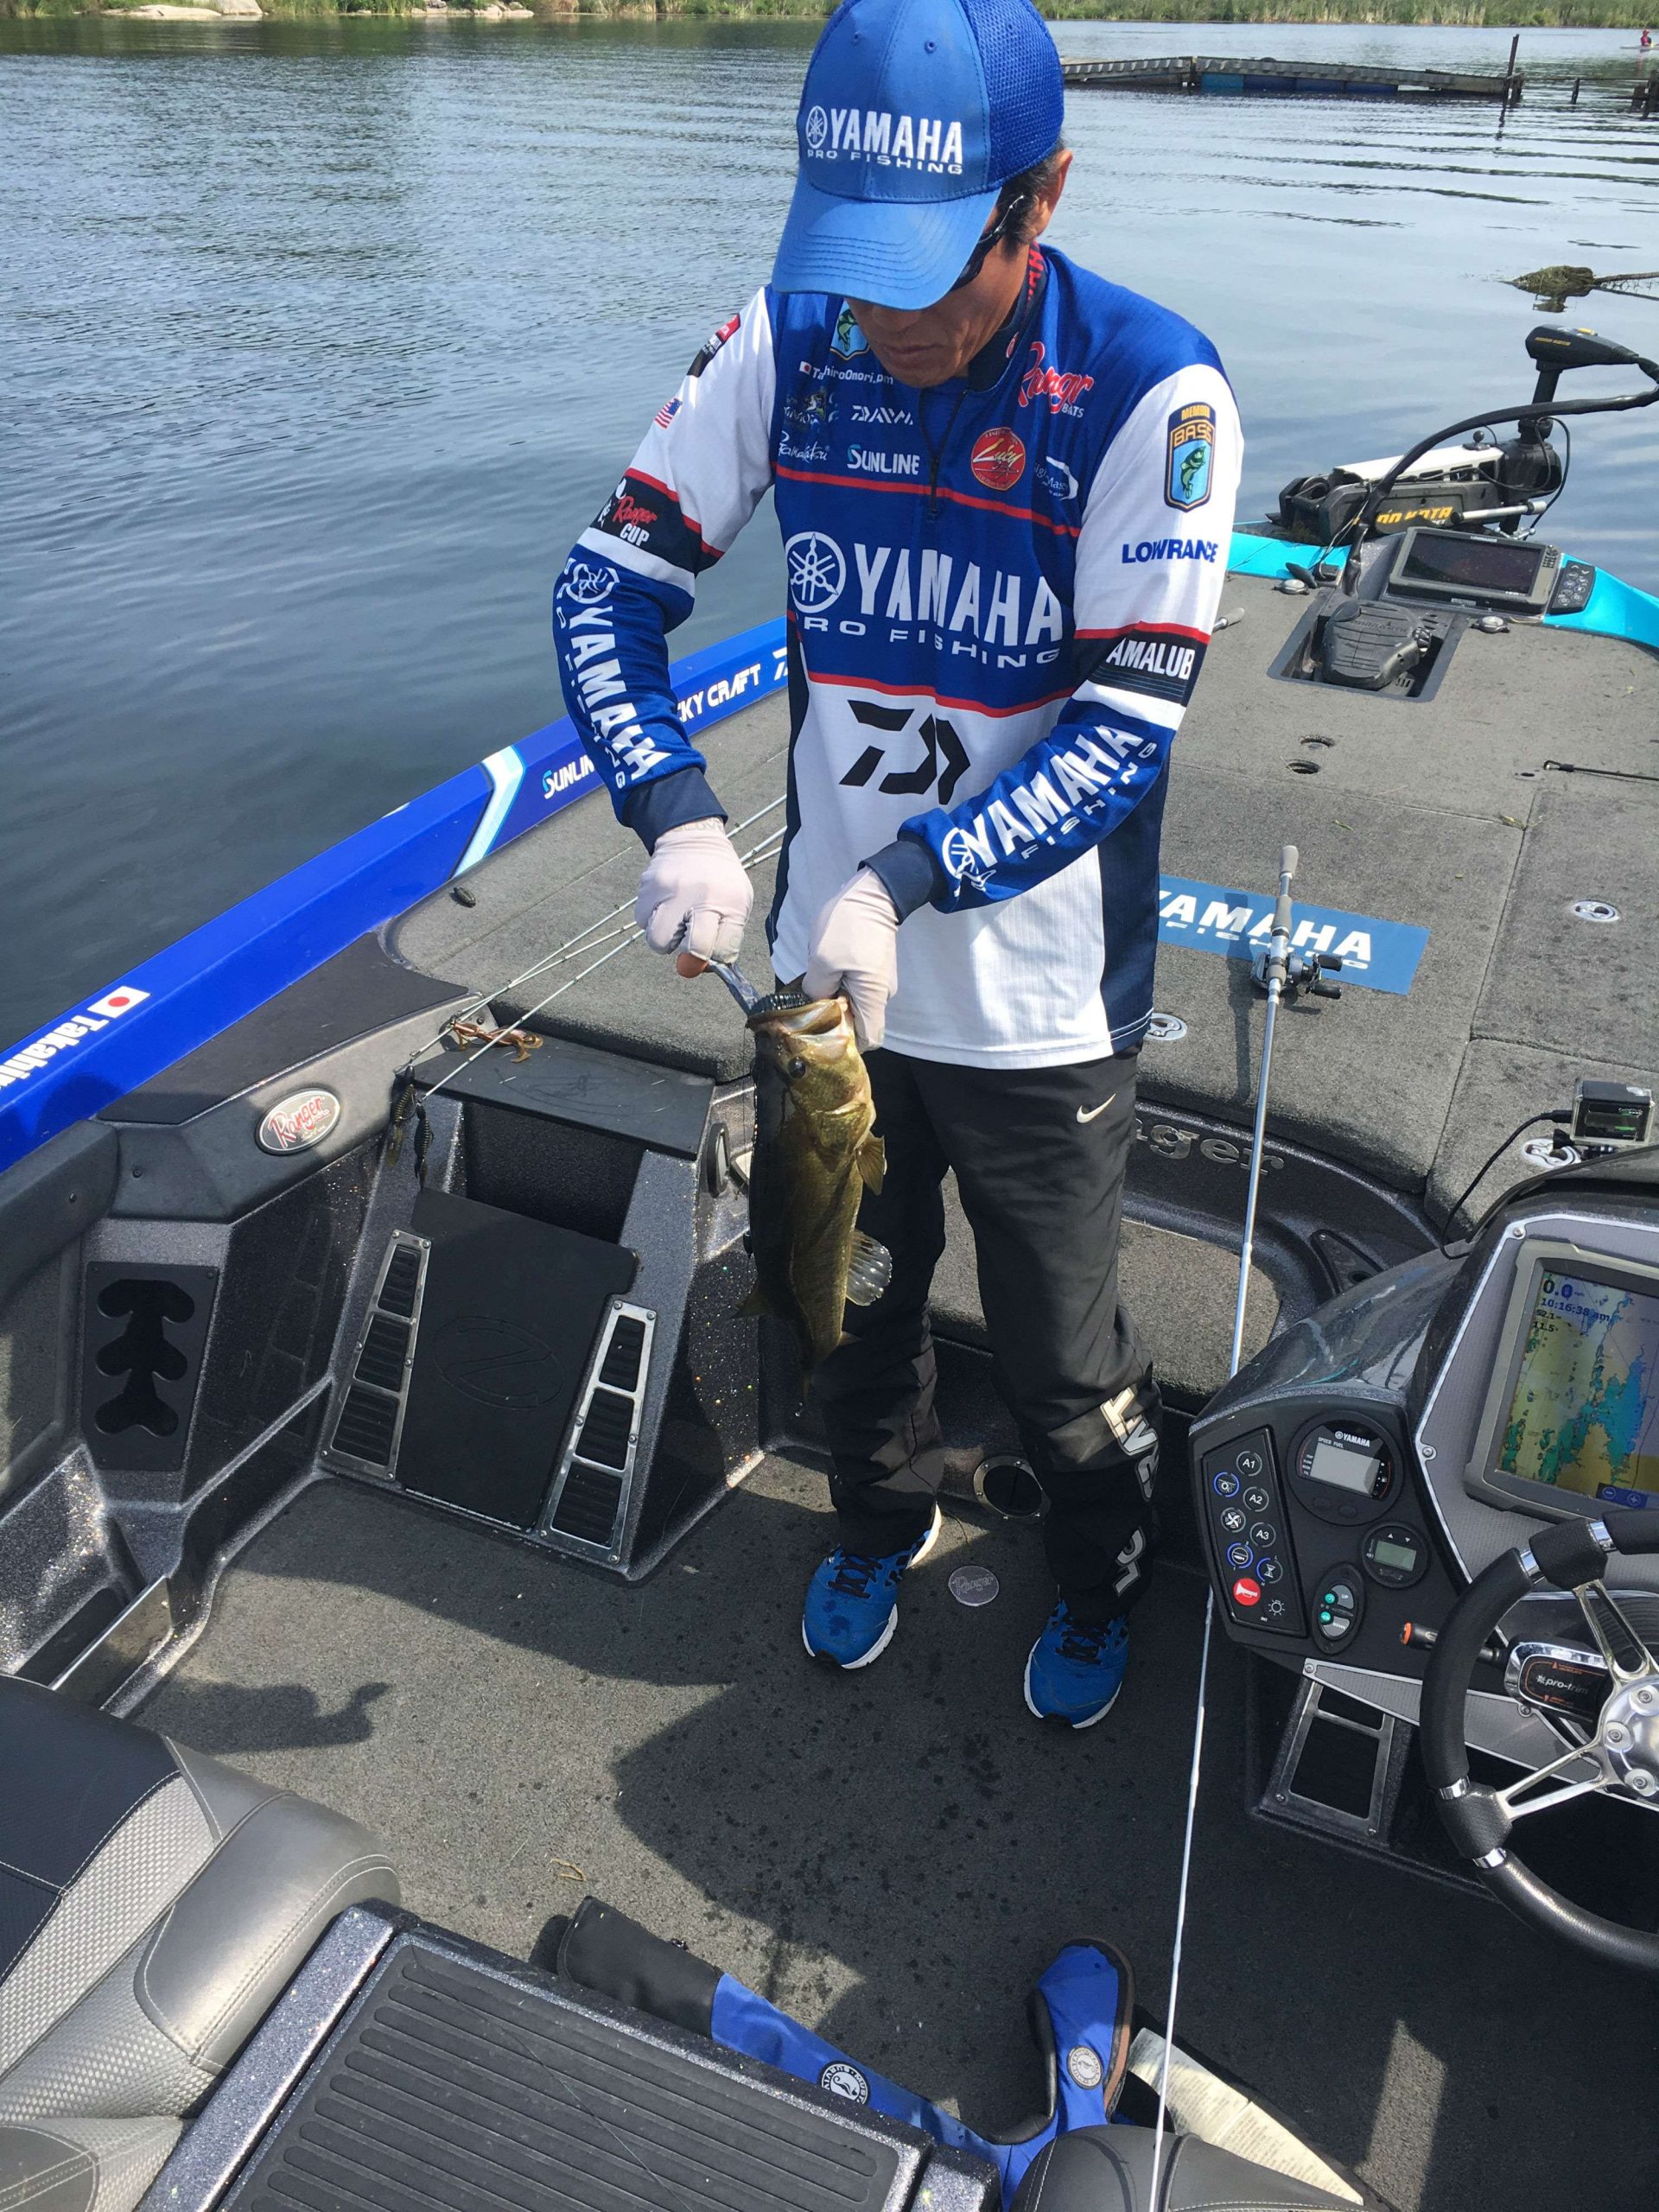 Takahiro Omori is culling up slowly. This one is a thick 31/2 to 4-pounder. Not as much fishing pressure after the Day 3 cut, but Tak feels his bites are down from the pressure from practice and Days 1 and 2. He knows he needs a good bag today and is staying positive. He's a stick that's for sure. Very good at what he does! I'm learning a bunch.  